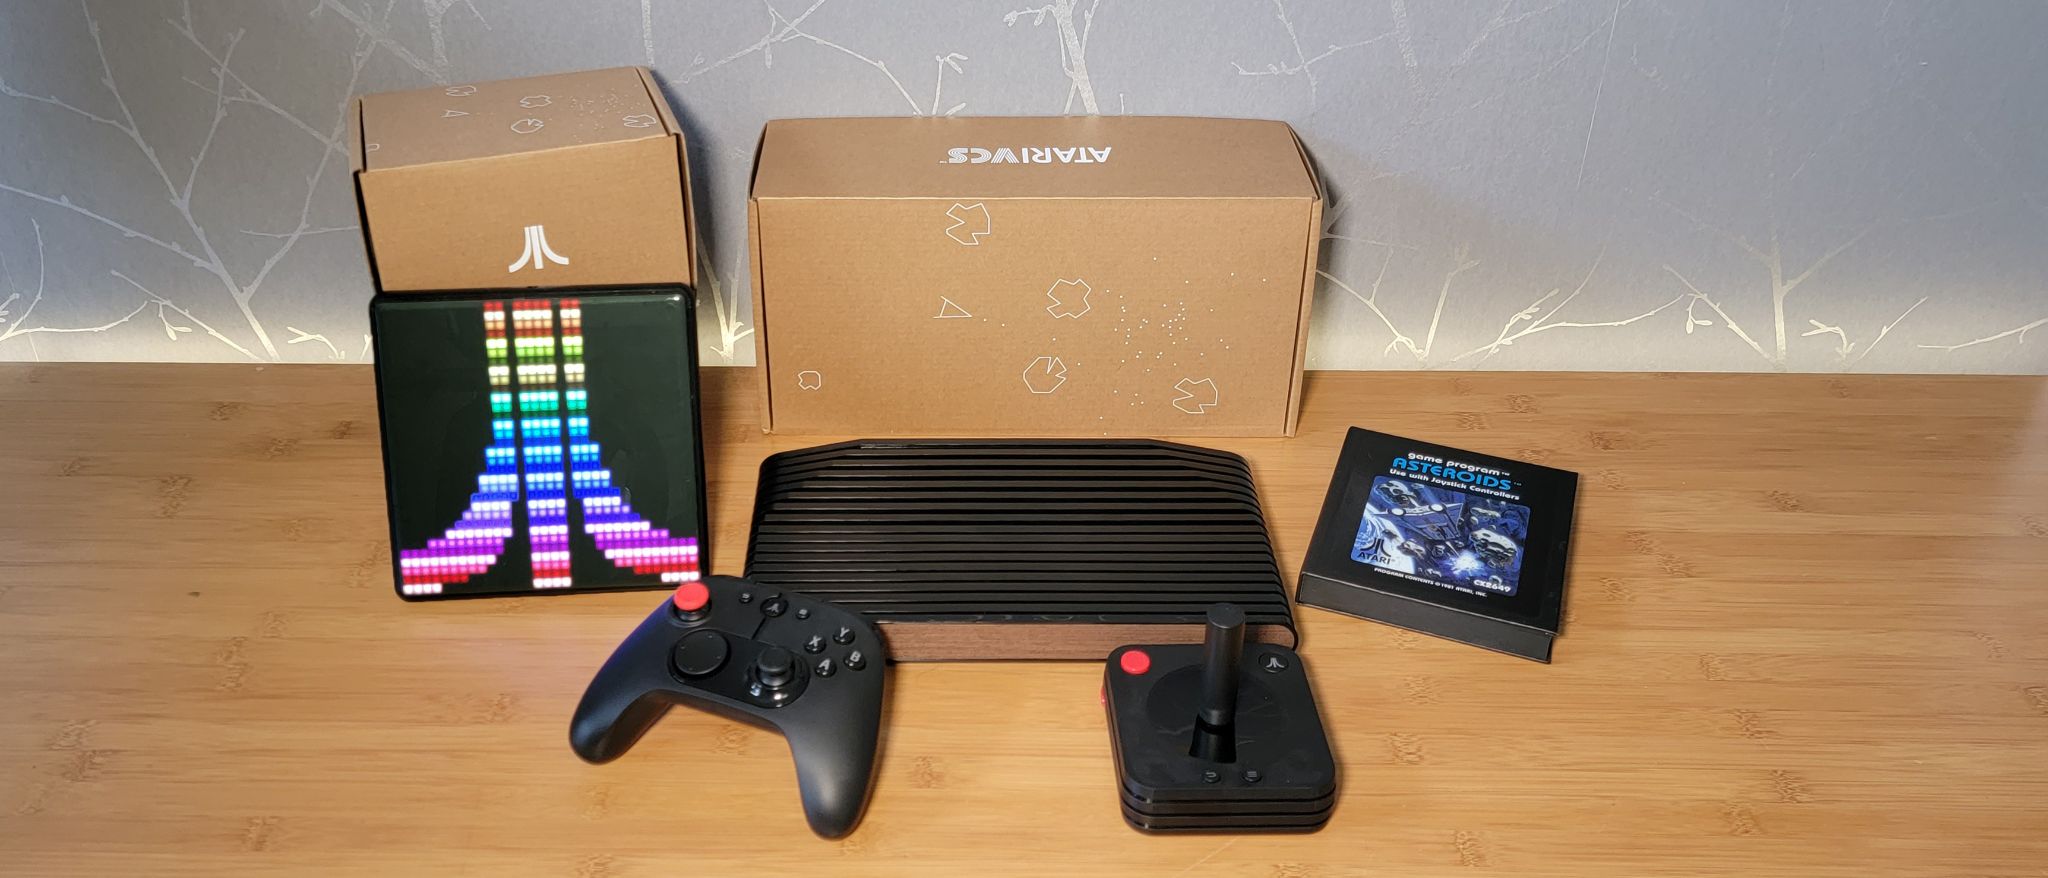 Atari VCS Console to Include Online Streams of Retro Games, Too